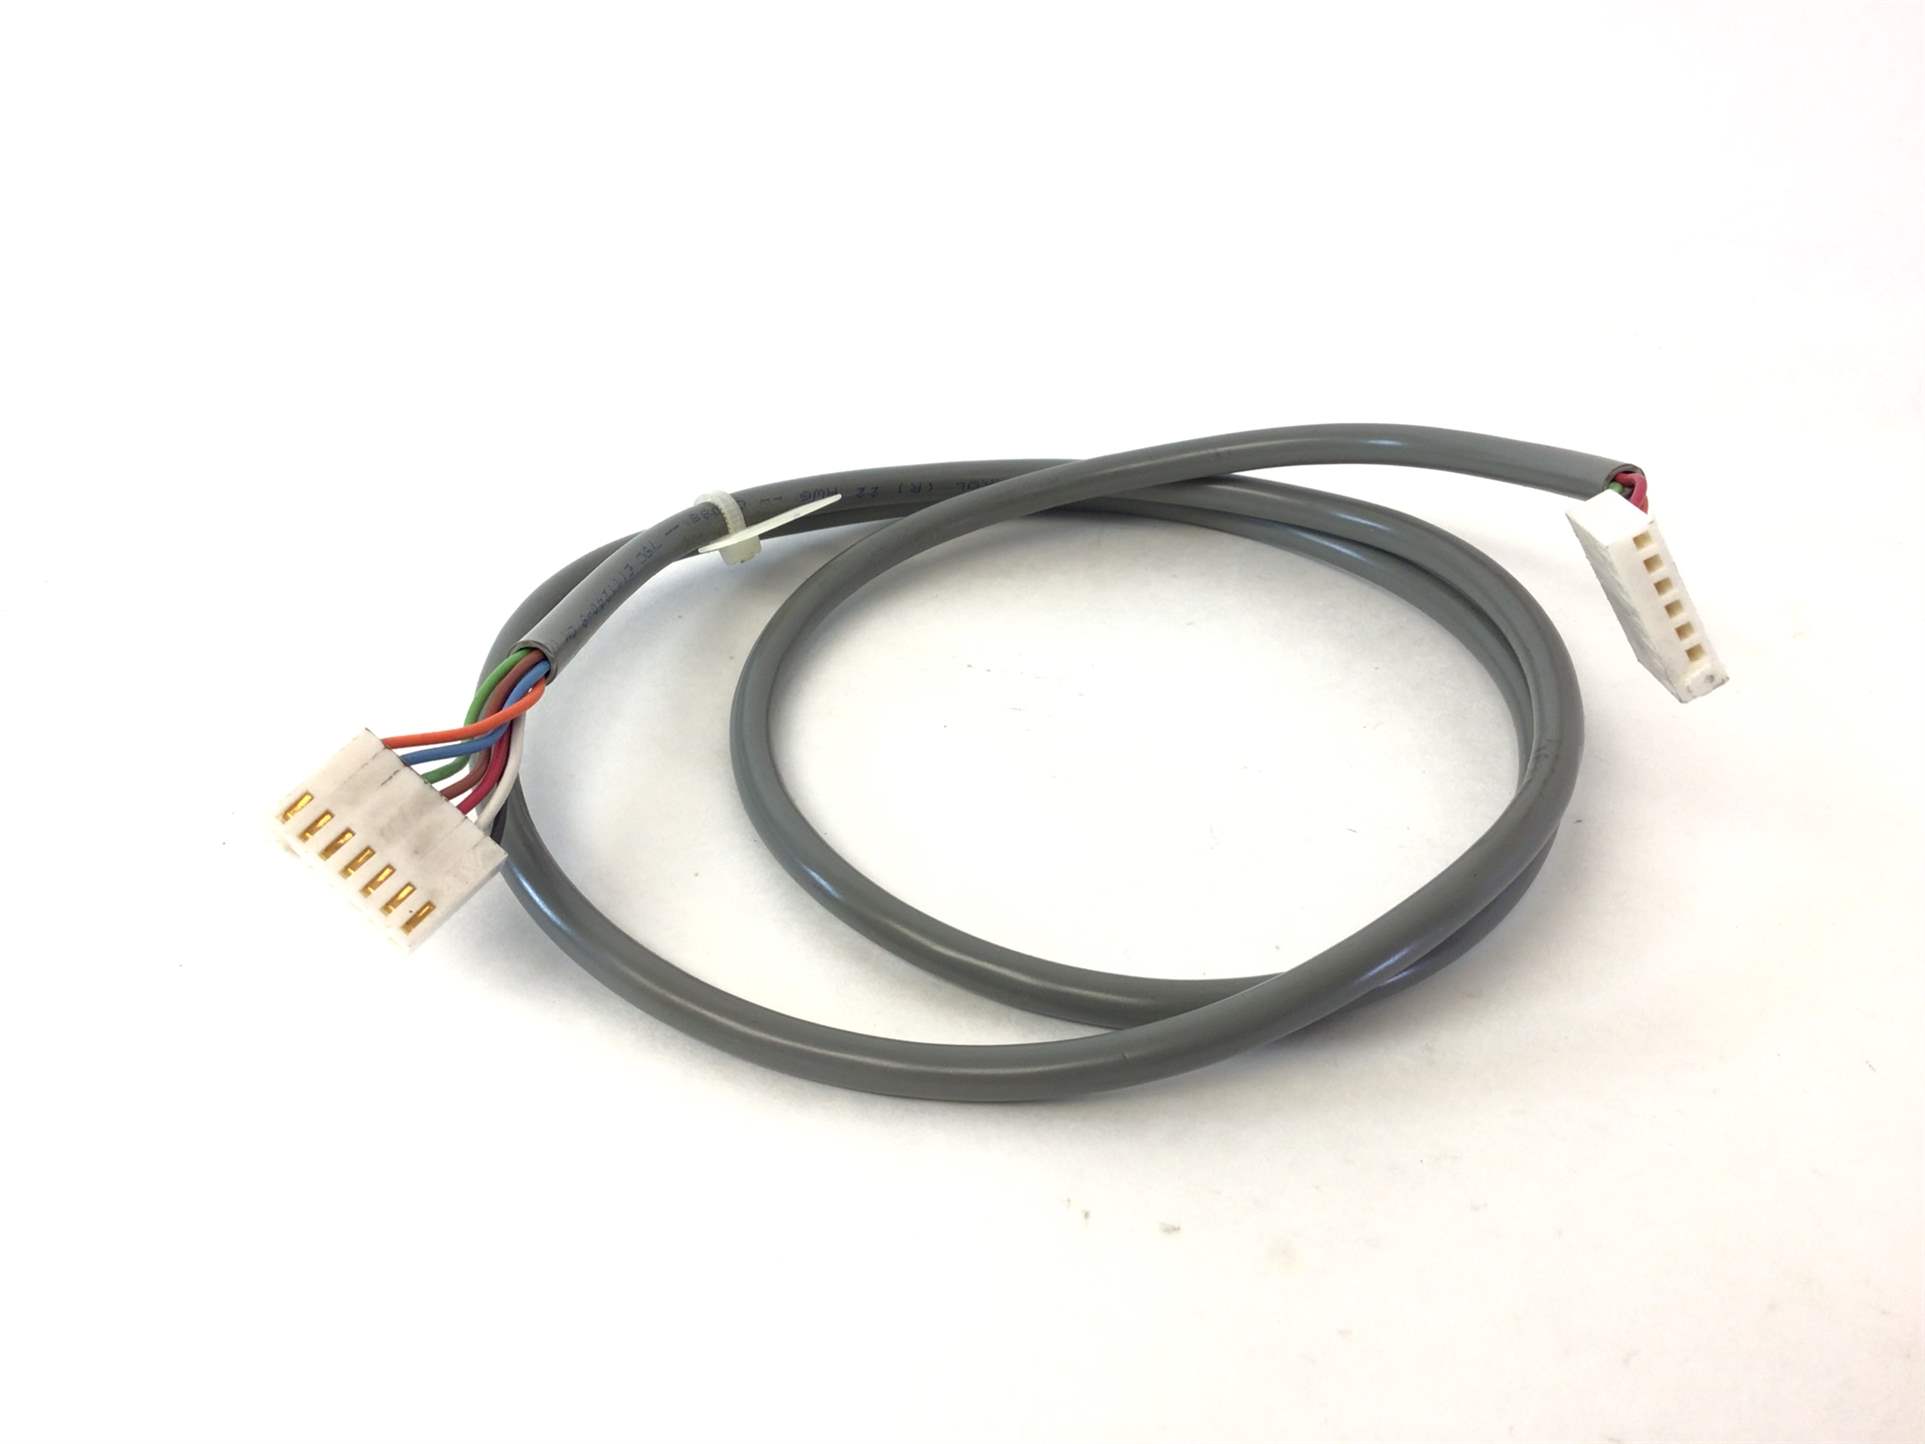 Display Console Wire Harness (Used)